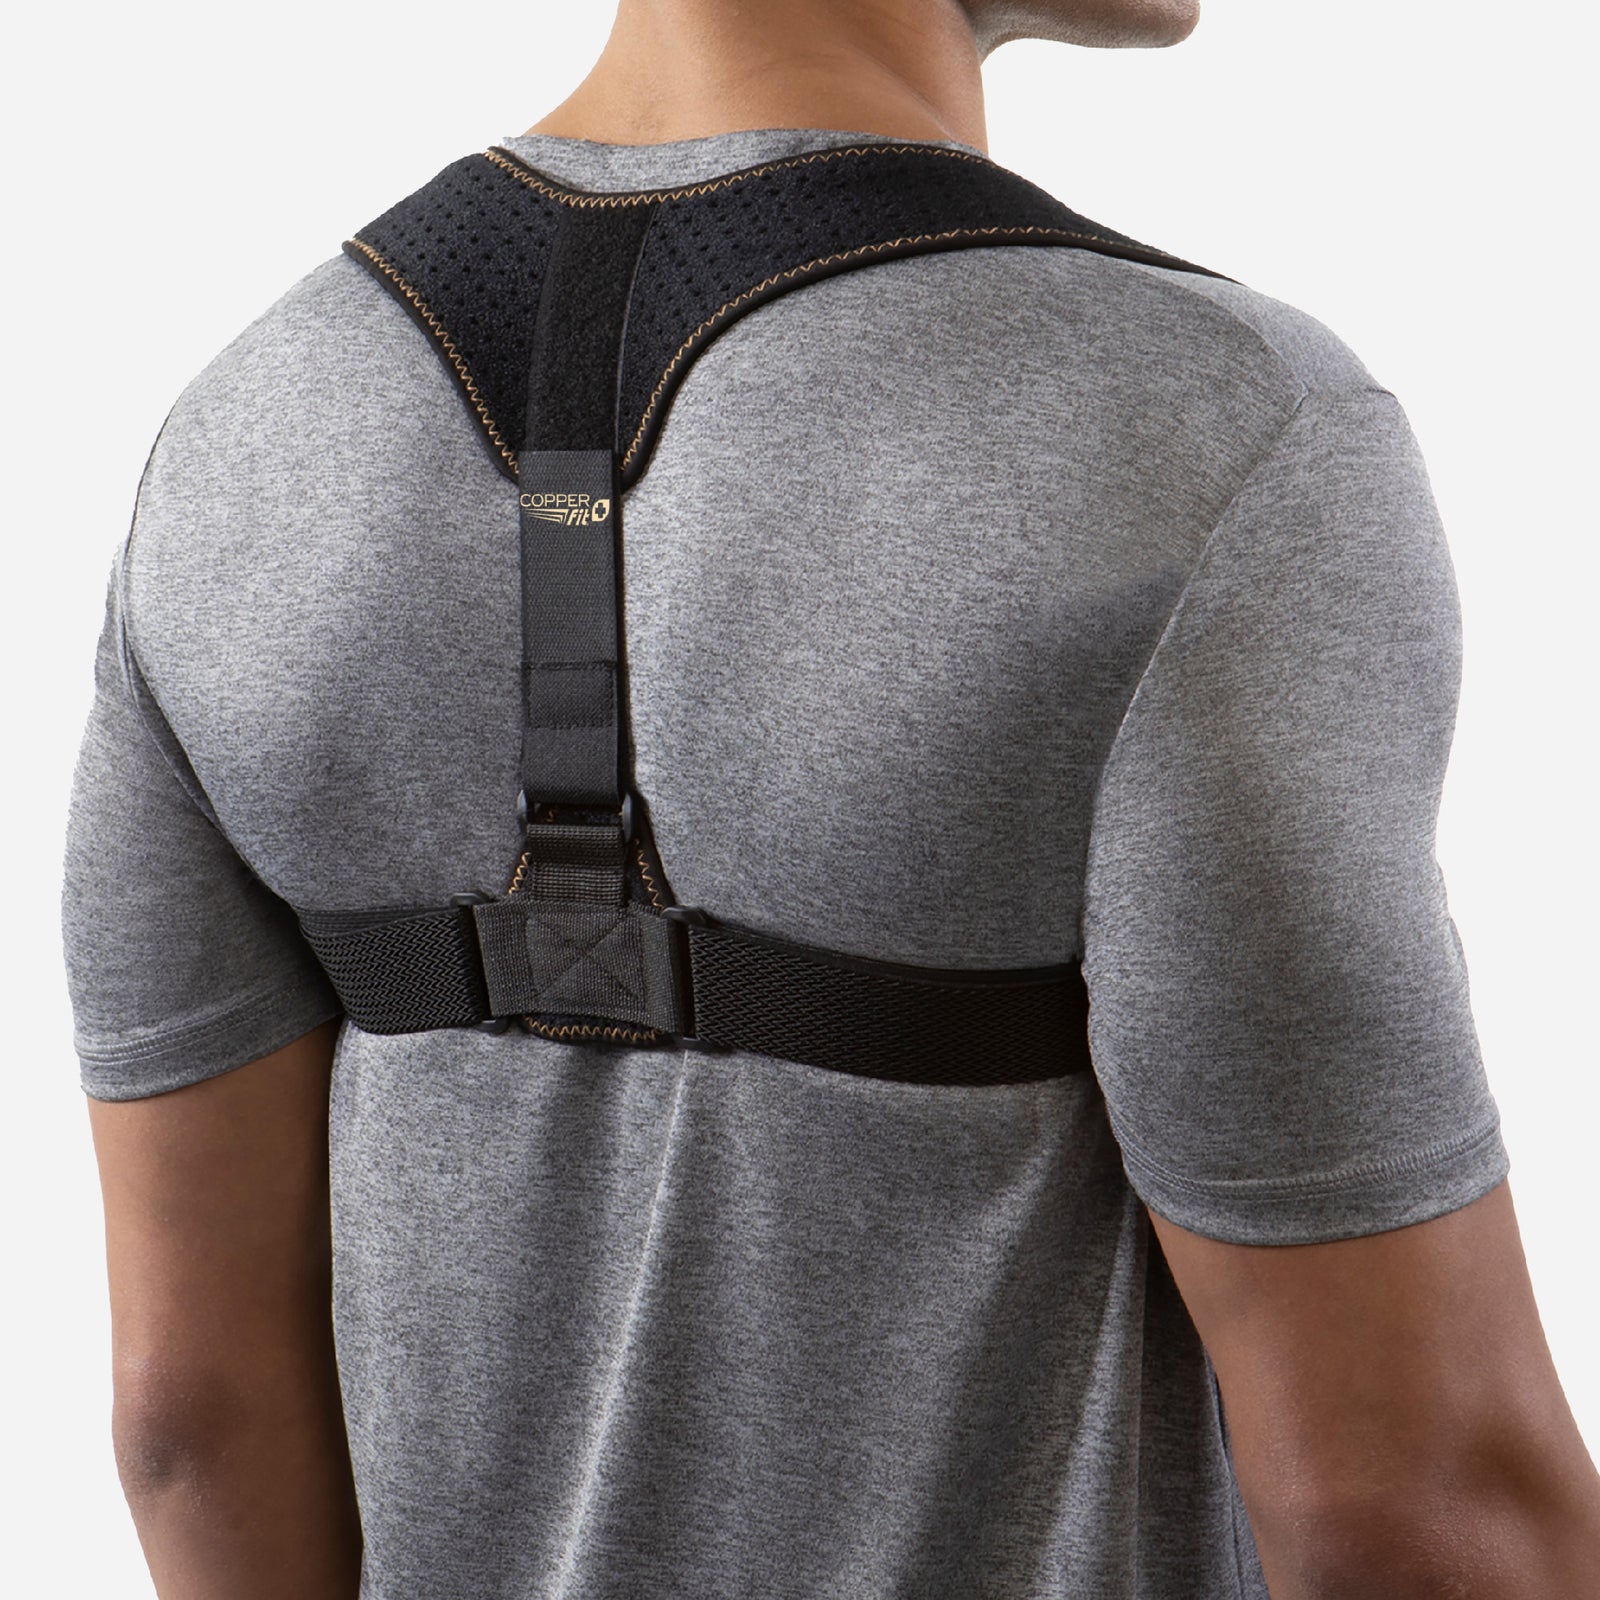 Ion clad Scientist Developed Copper Infused Back Brace with Lower Lumbar  Support-XL Size Foot Support - Buy Ion clad Scientist Developed Copper  Infused Back Brace with Lower Lumbar Support-XL Size Foot Support